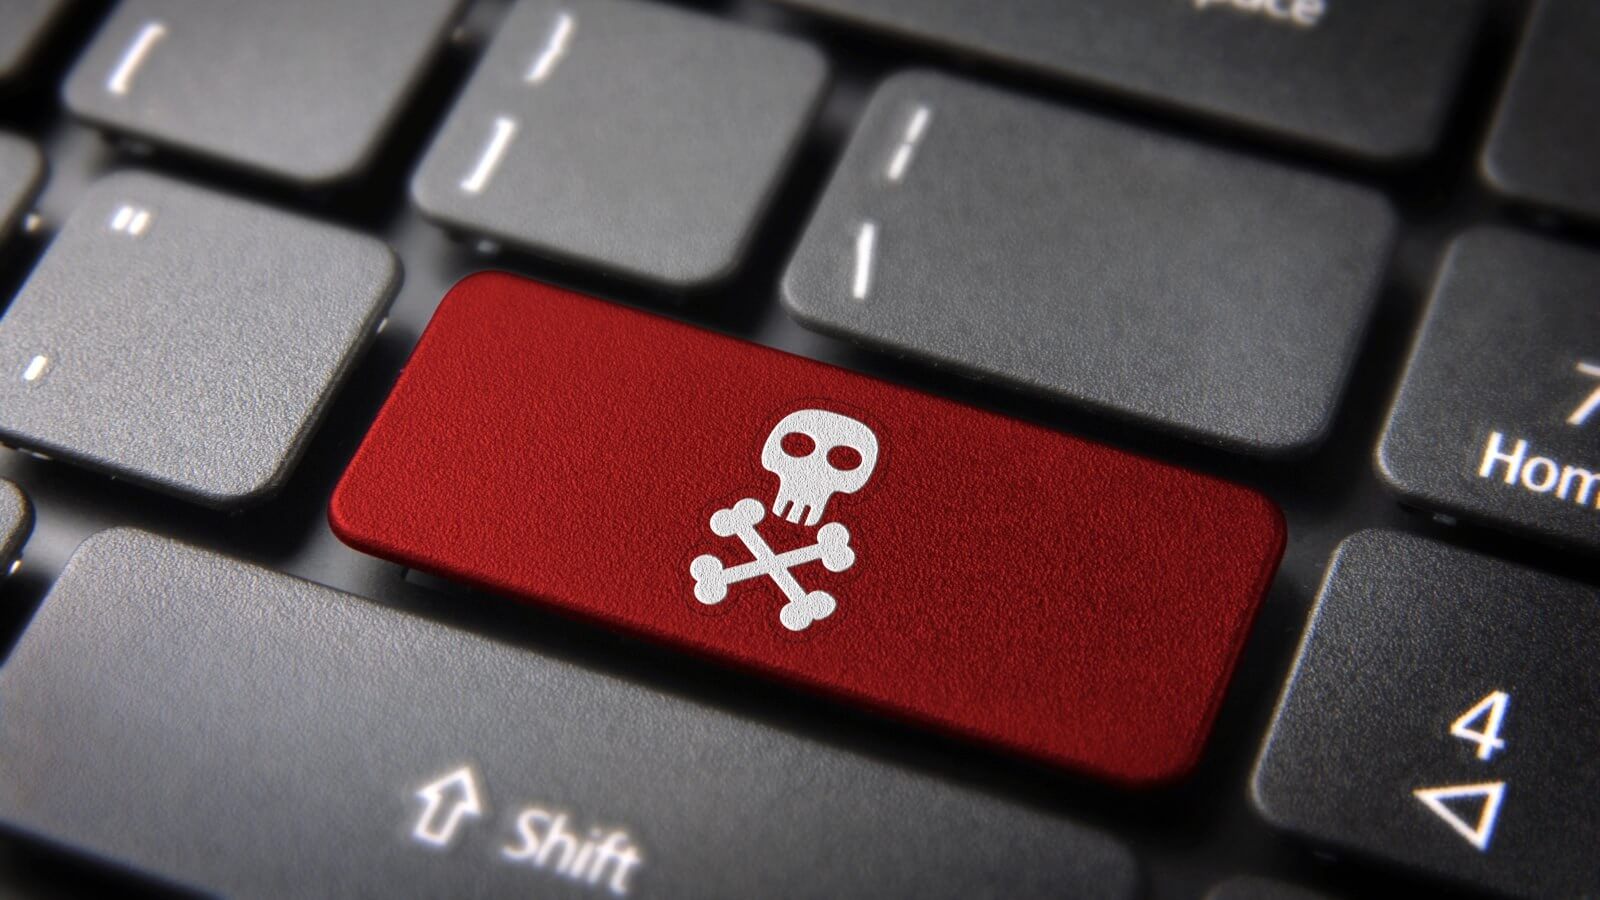 Russia may consider legalizing piracy to sidestep sanctions